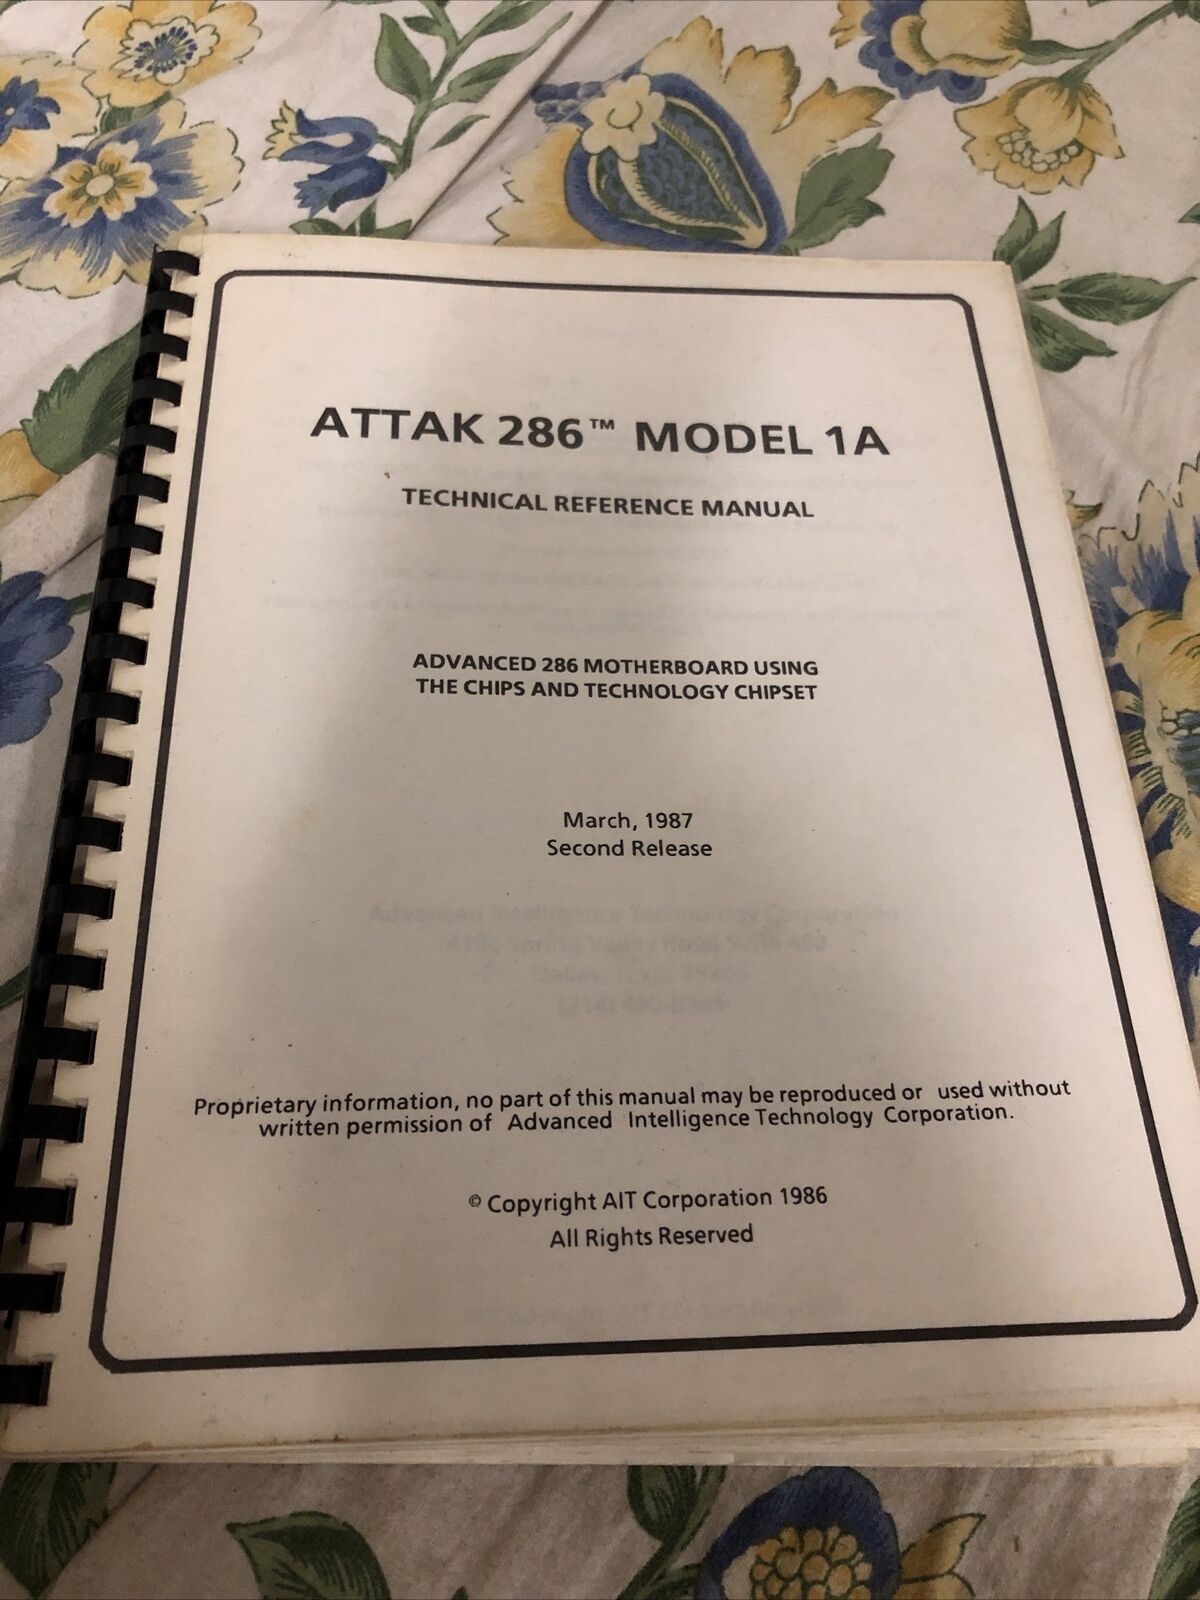 ATTAK 286 Model 1A Technical Reference Manual Advanced 286 Motherboard 1987 VTG